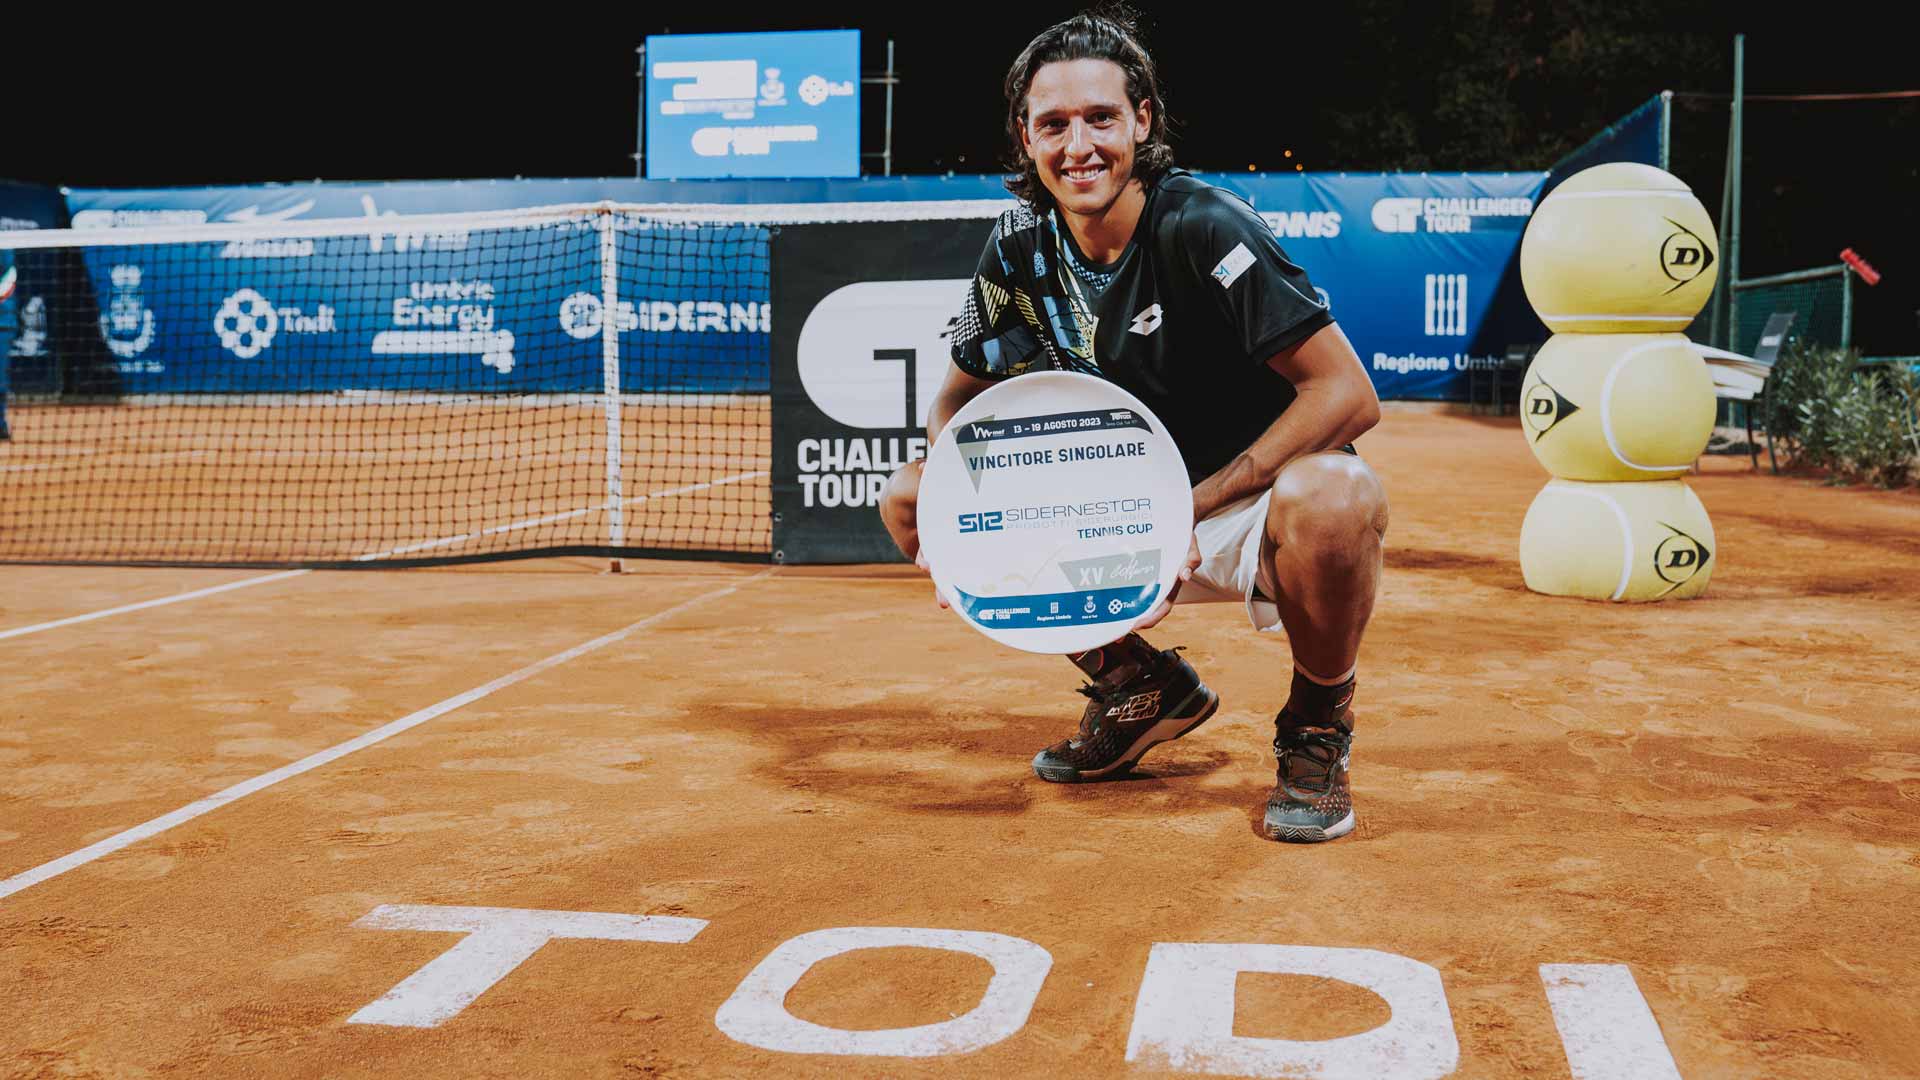 Luciano Darderi wins his first Challenger title in Todi, Italy.